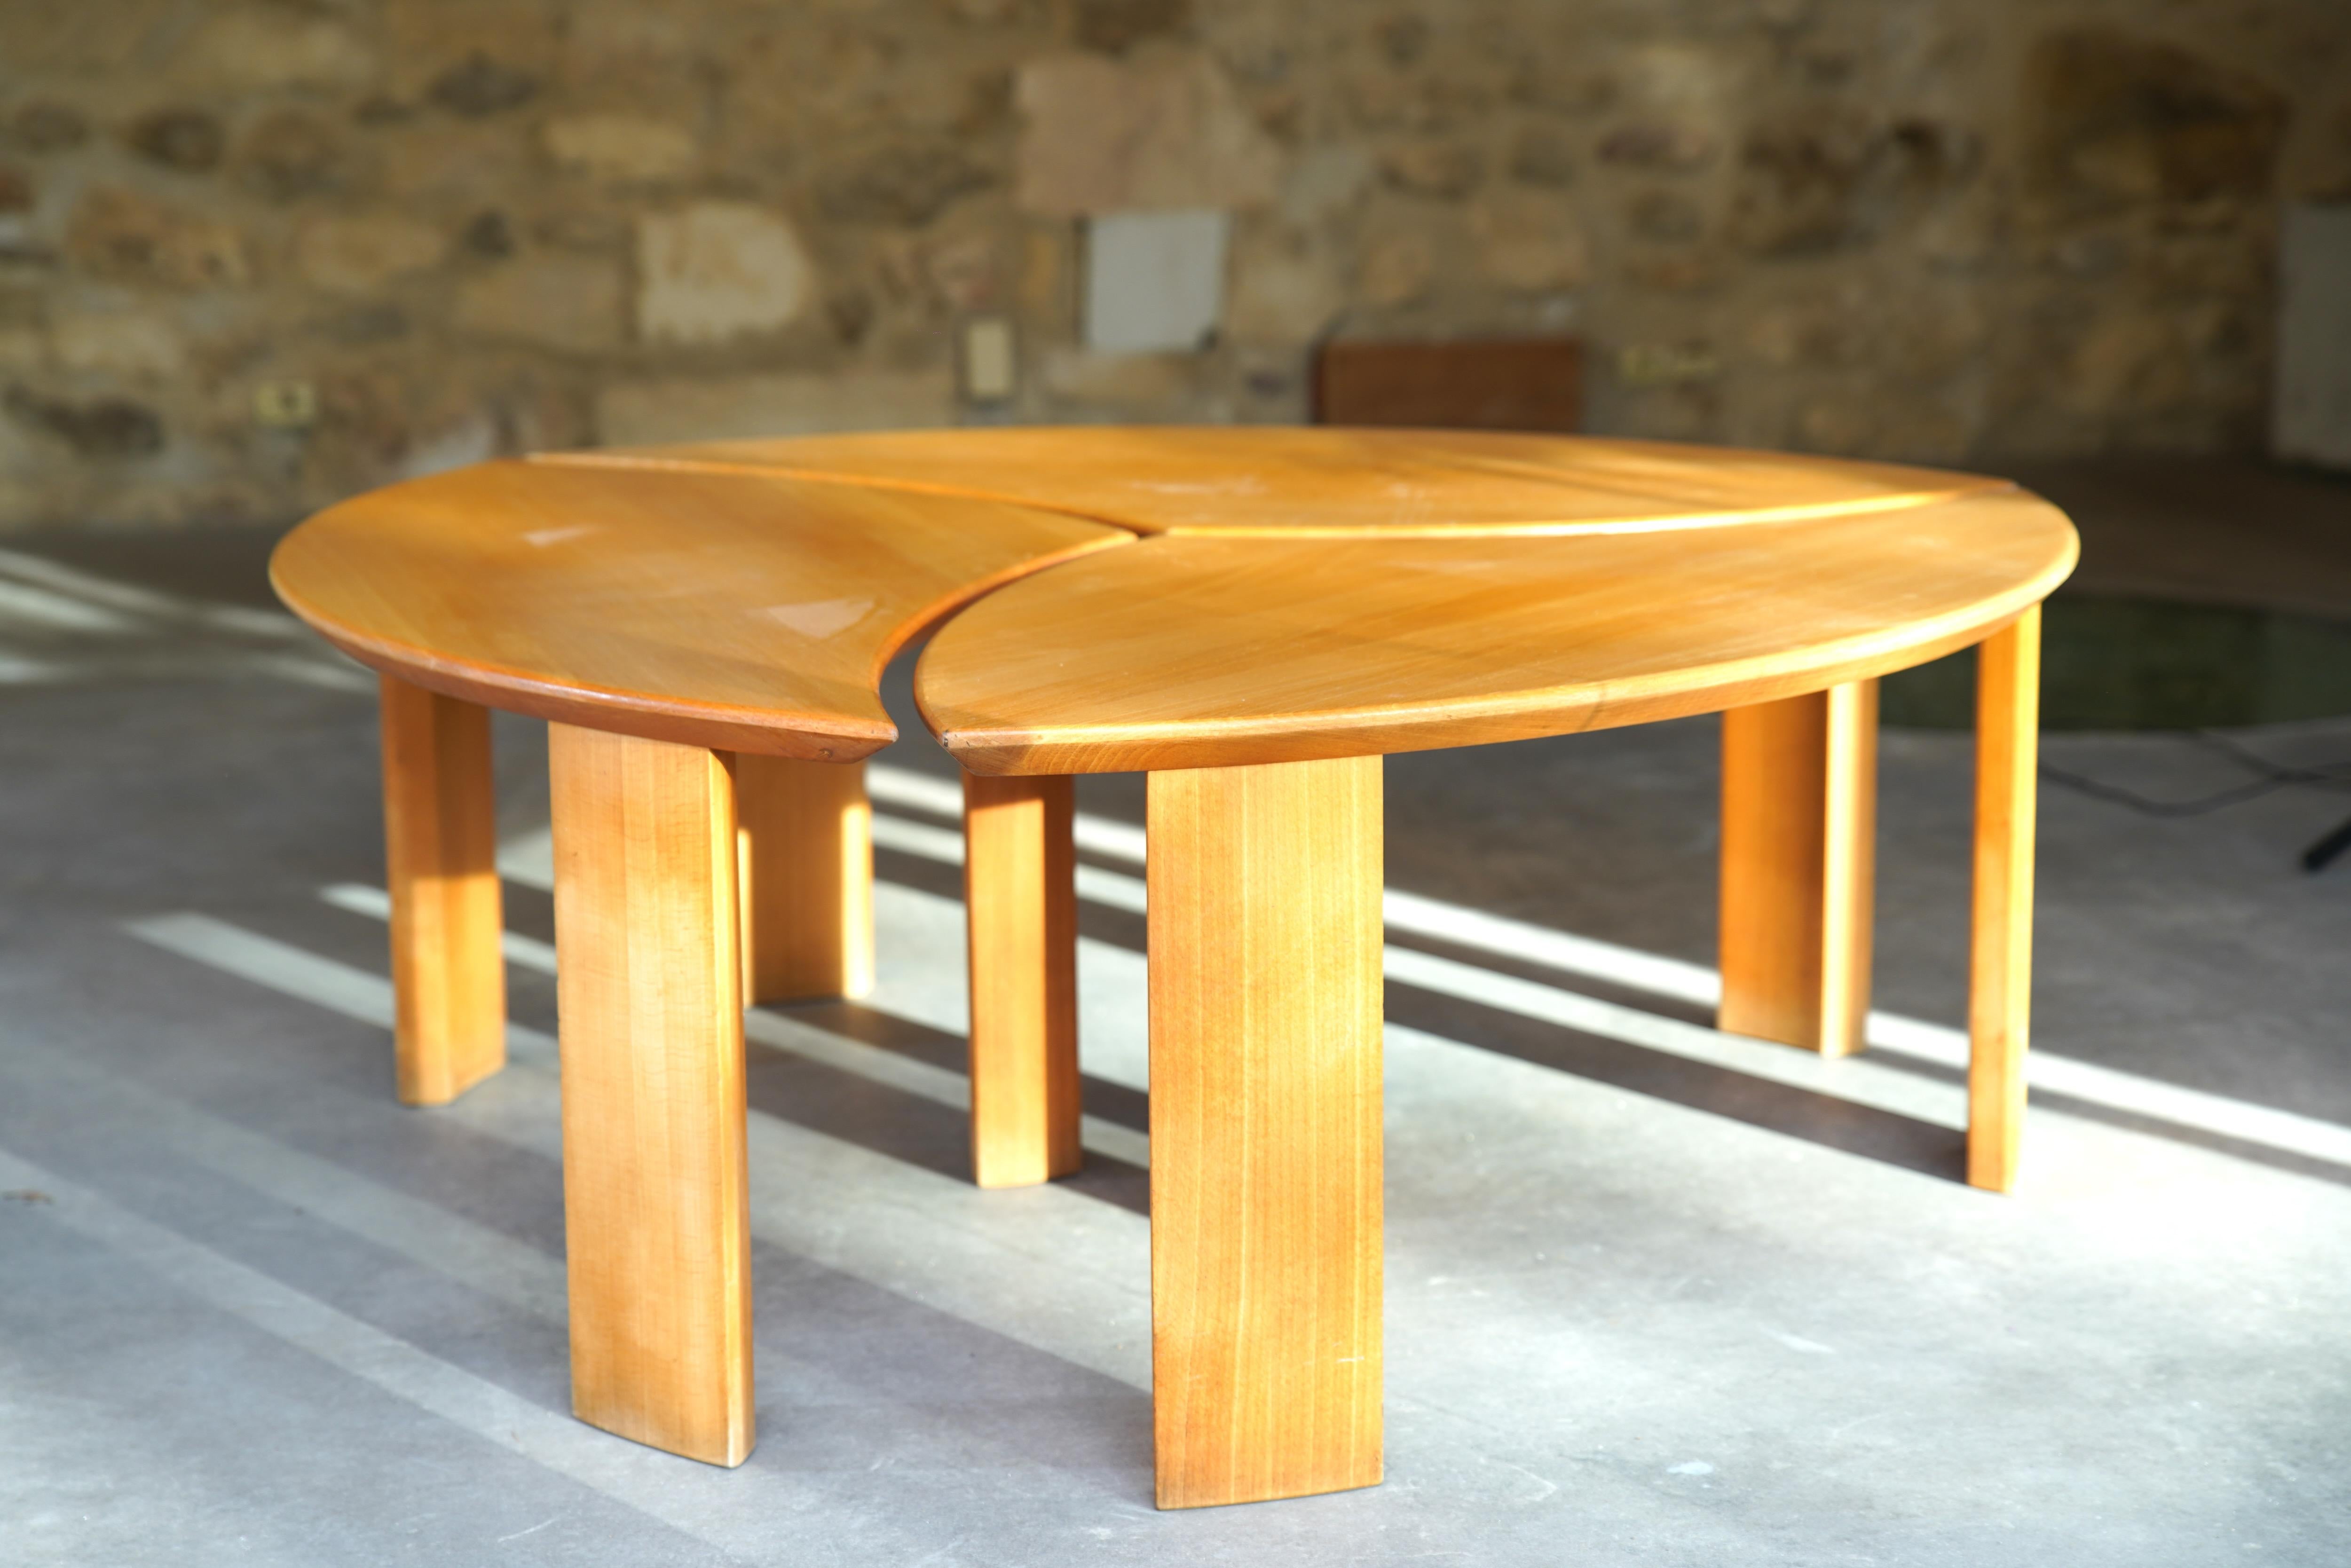 French Pierre Chapo 'Petal' Coffee Table in Elm Wood for Seltz, France circa 1978